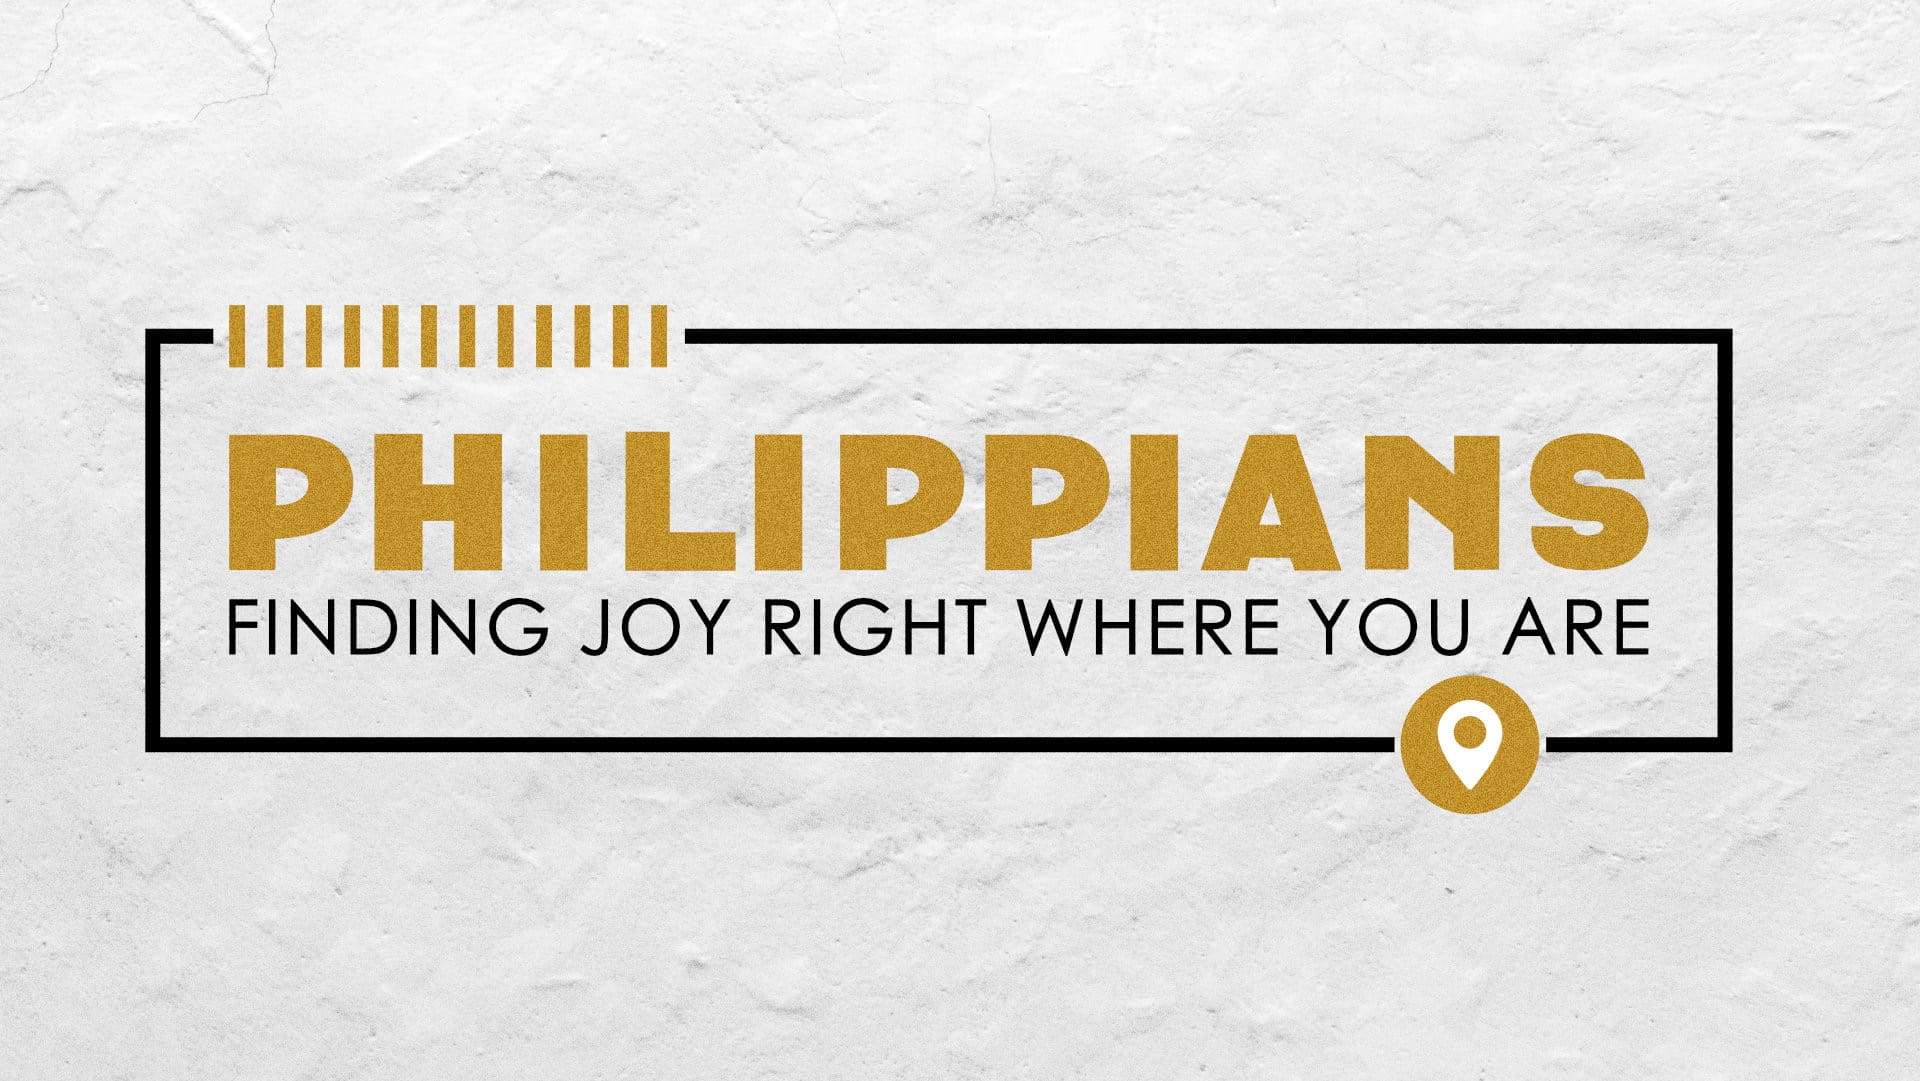 Philippians [Finding Joy Right Where You Are]